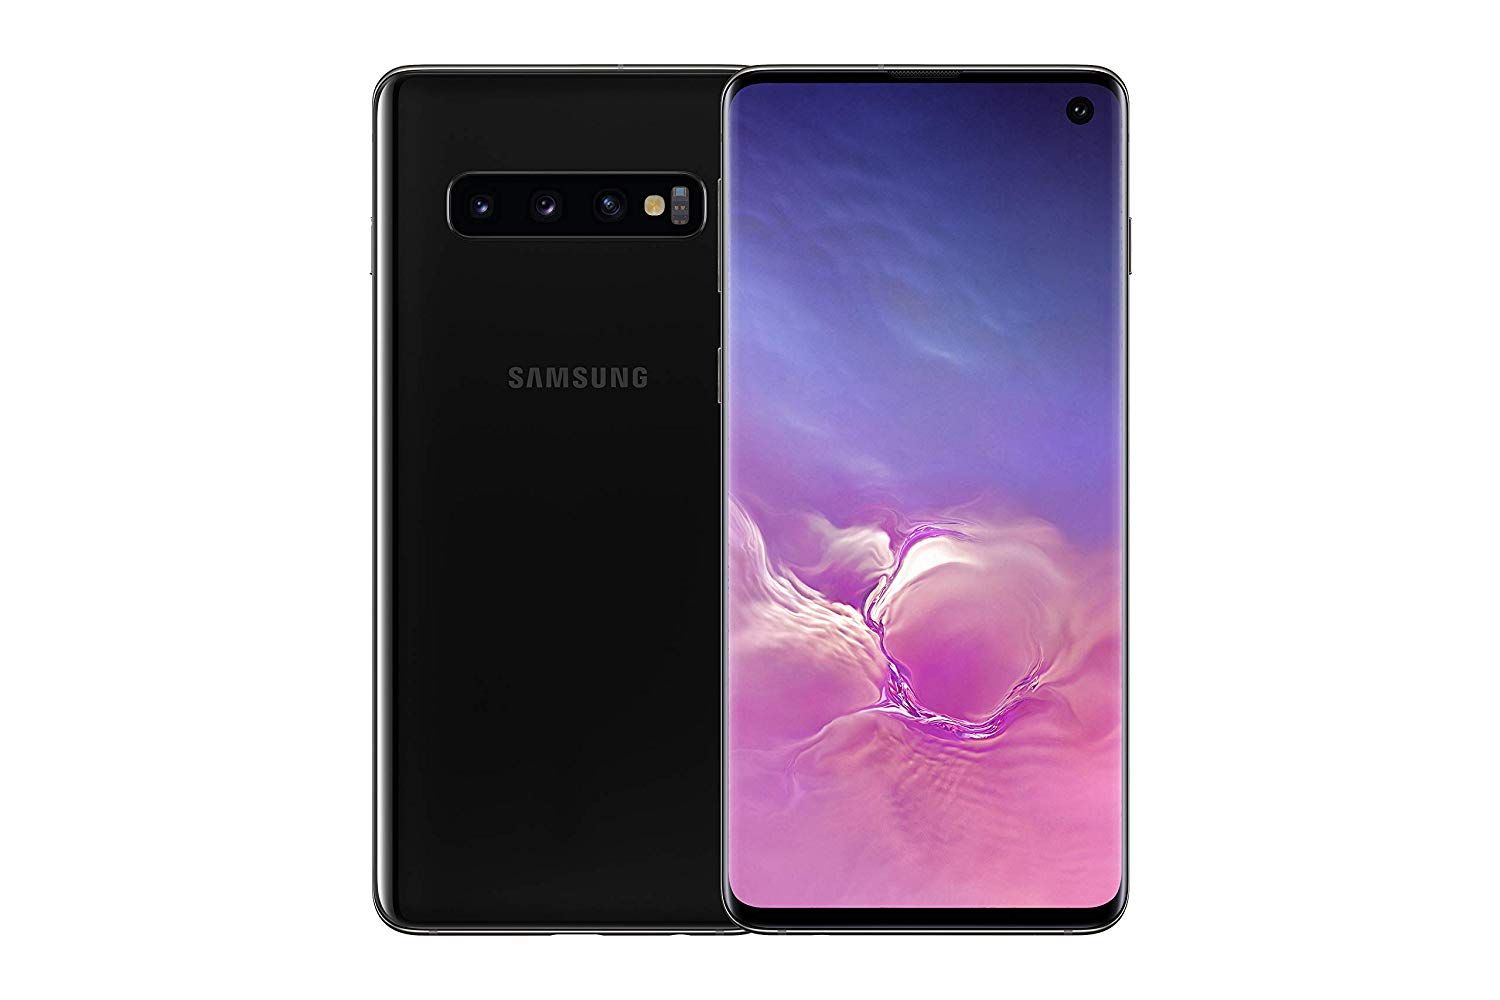 fitbit compatible with galaxy s10